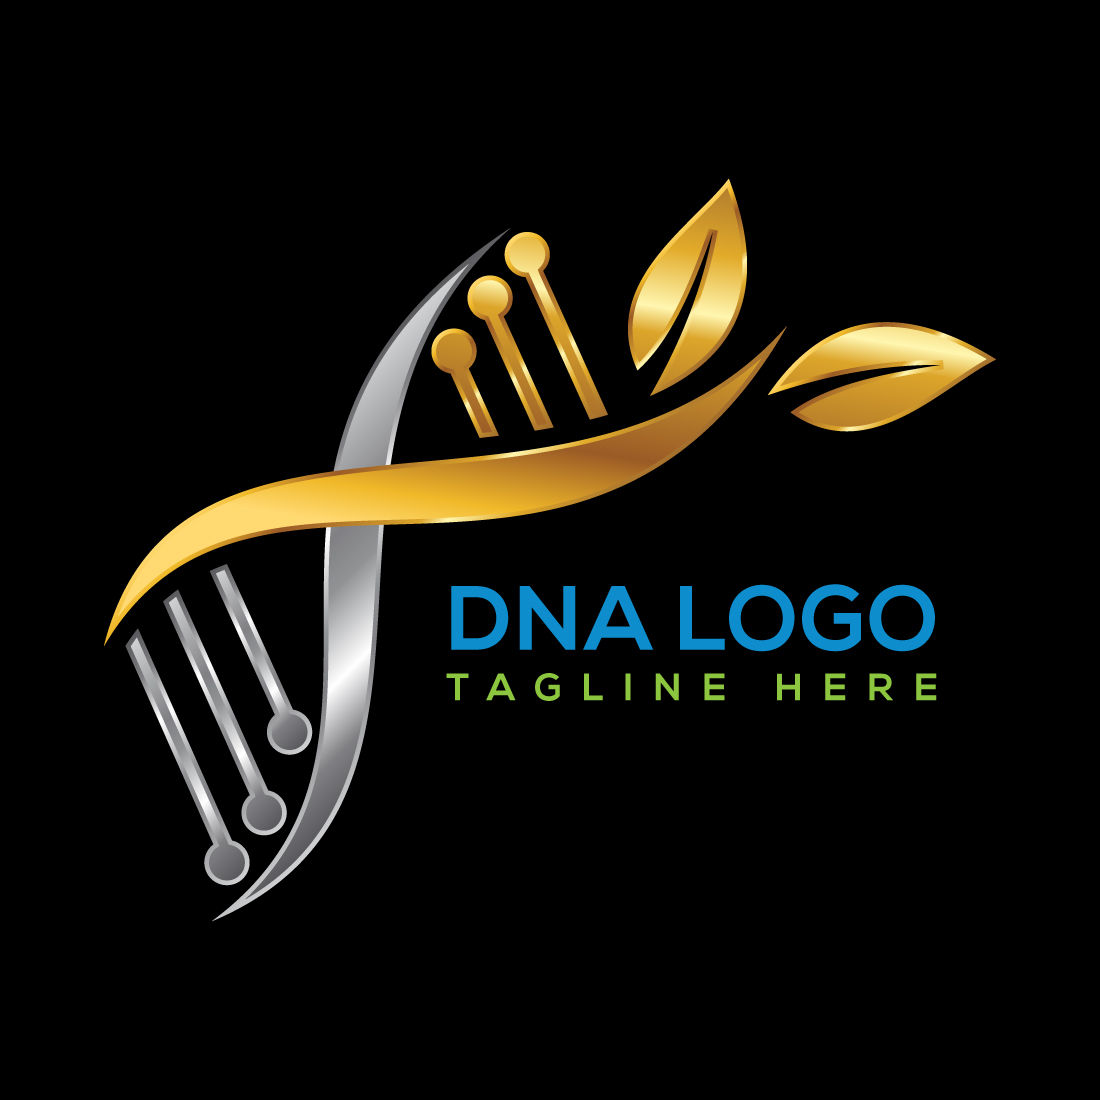 Image of a colorful logo in the form of DNA on a black background.